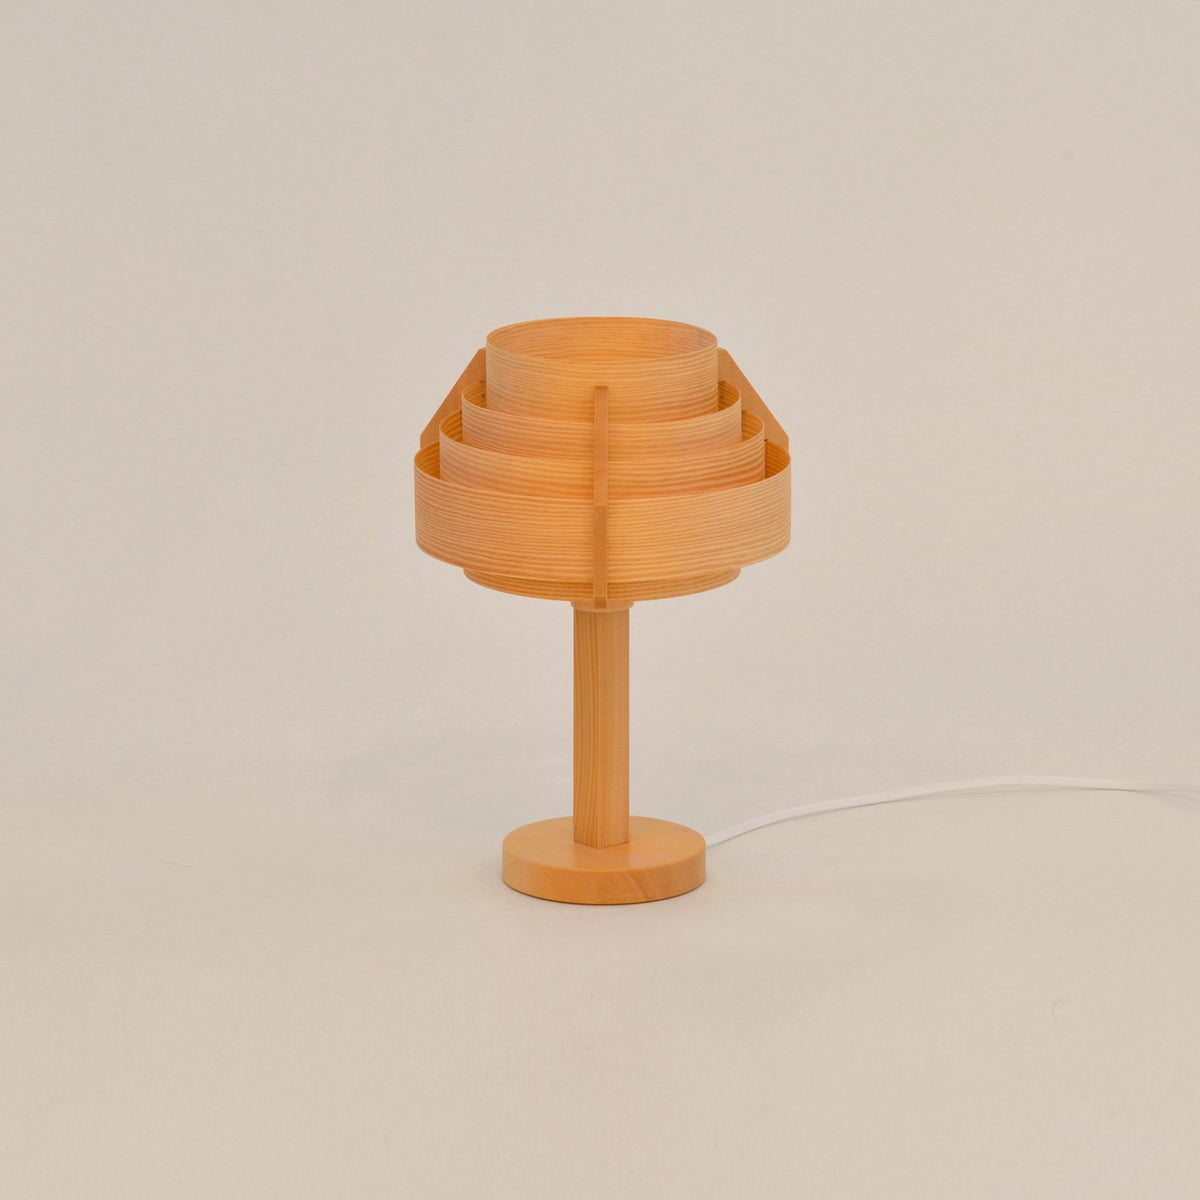 Jakobsson Table Lamp - Small